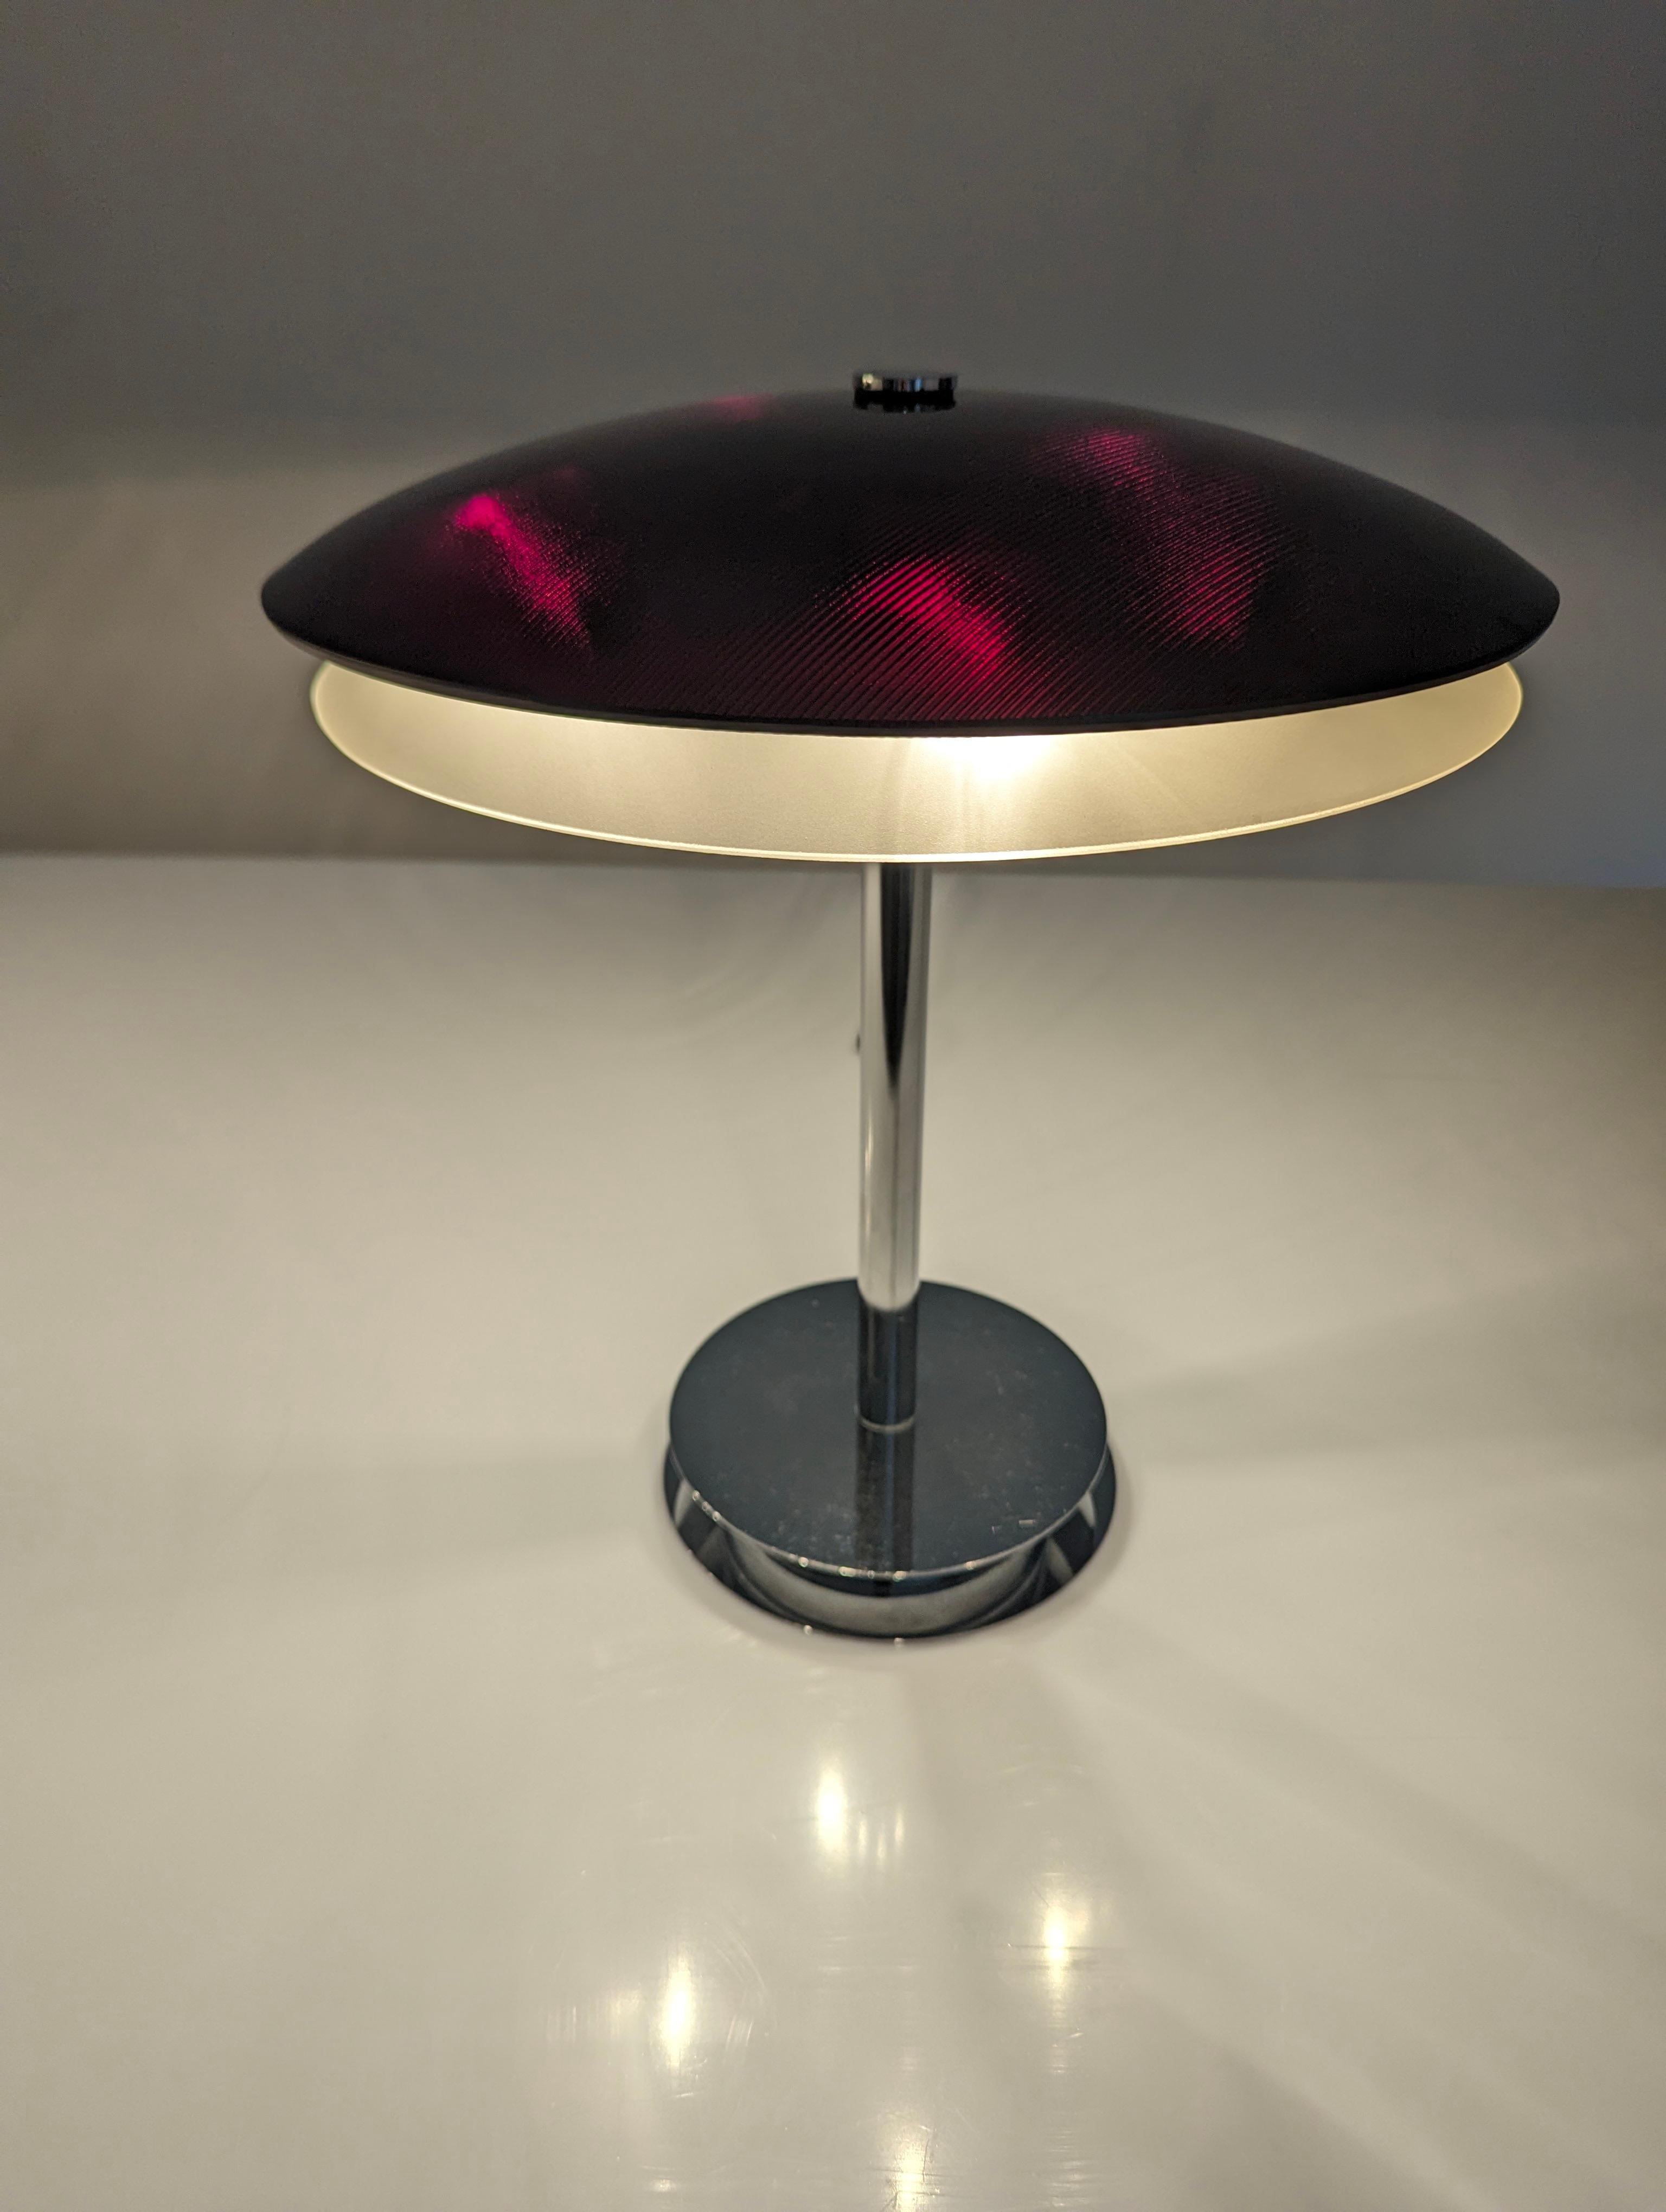 Elegant table lamp designed by Fontana Arte in 1954. Bromated base with double curved crystal top in black with burgundy red reflections when lit, and lower translucent white that emits a pleasant light.